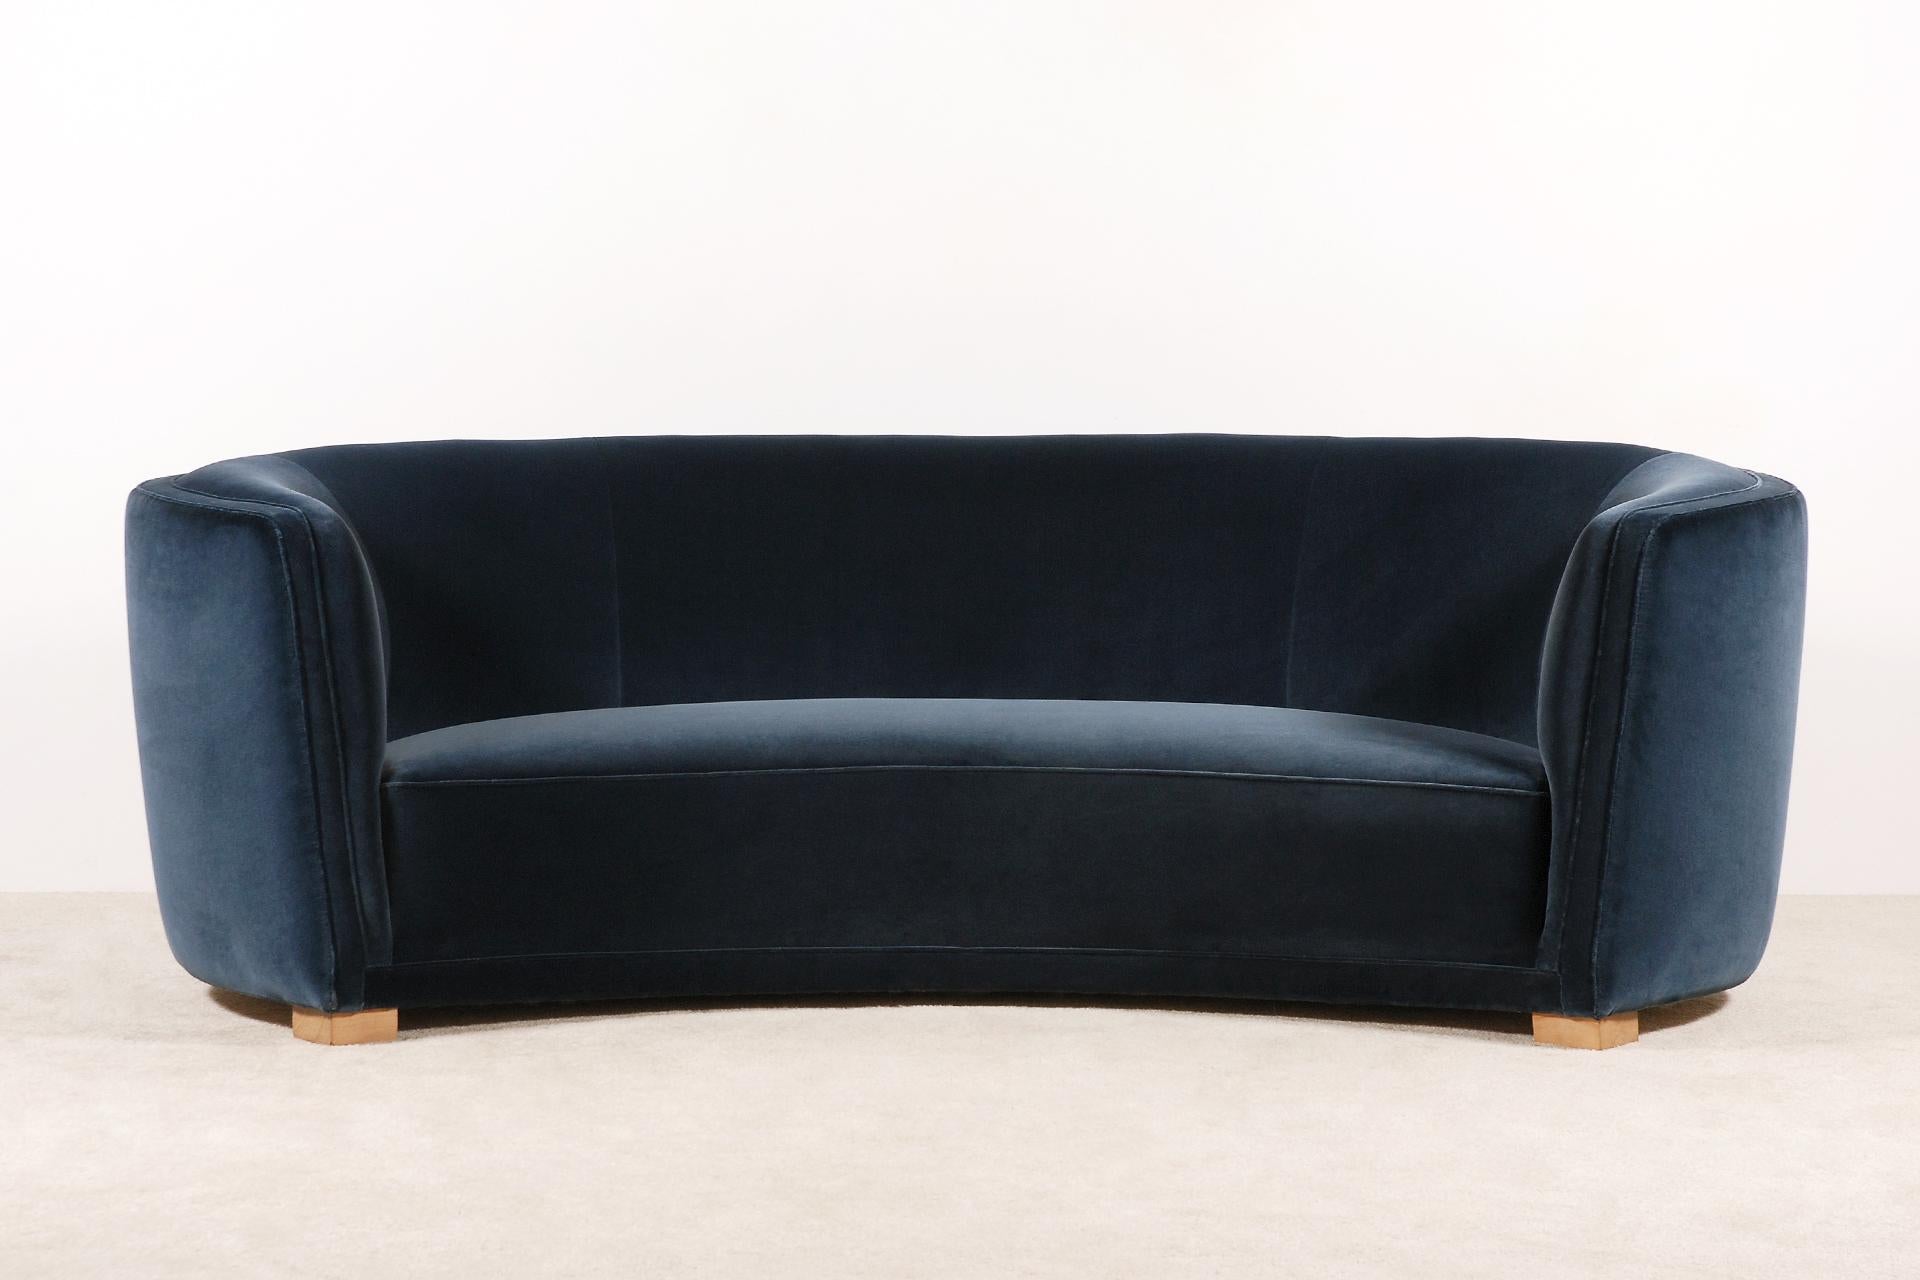 Exceptional and unique piece.
Large three-seat curved sofa manufactured in Denmark during the 1930s.
Lovely shape and curves. Very comfortable seat.
Natural color waxed beech feet.

This sofa has been fully restored and newly upholstered in the